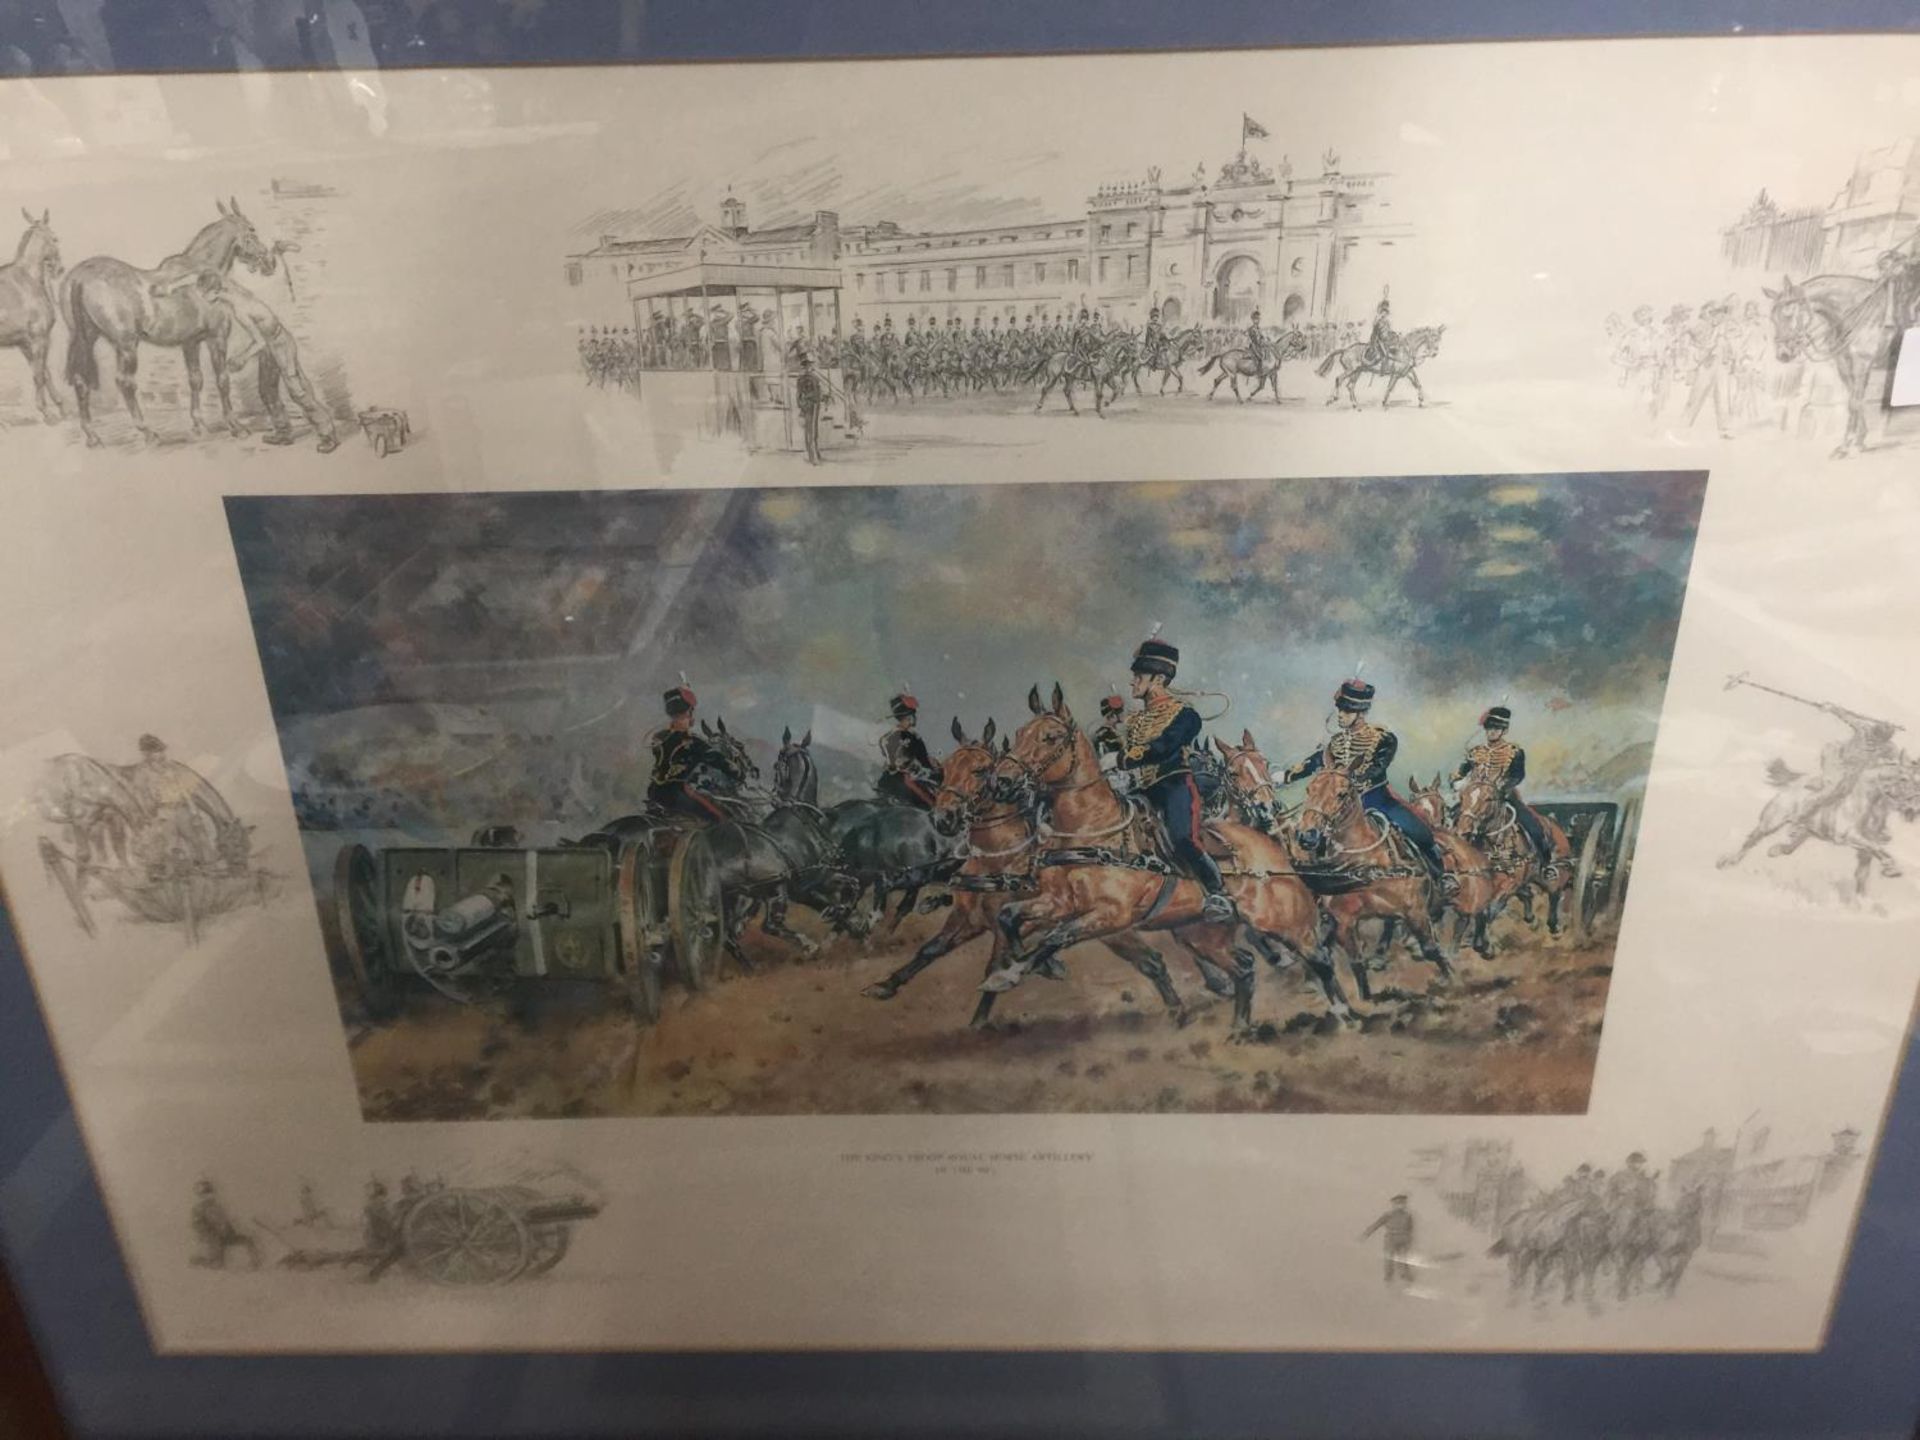 A LARGE FRAMED JOHN WONKLYN "THE KINGS TROOP ROYAL HORSE ARTILLARY SIGNED PRINT - Image 2 of 2